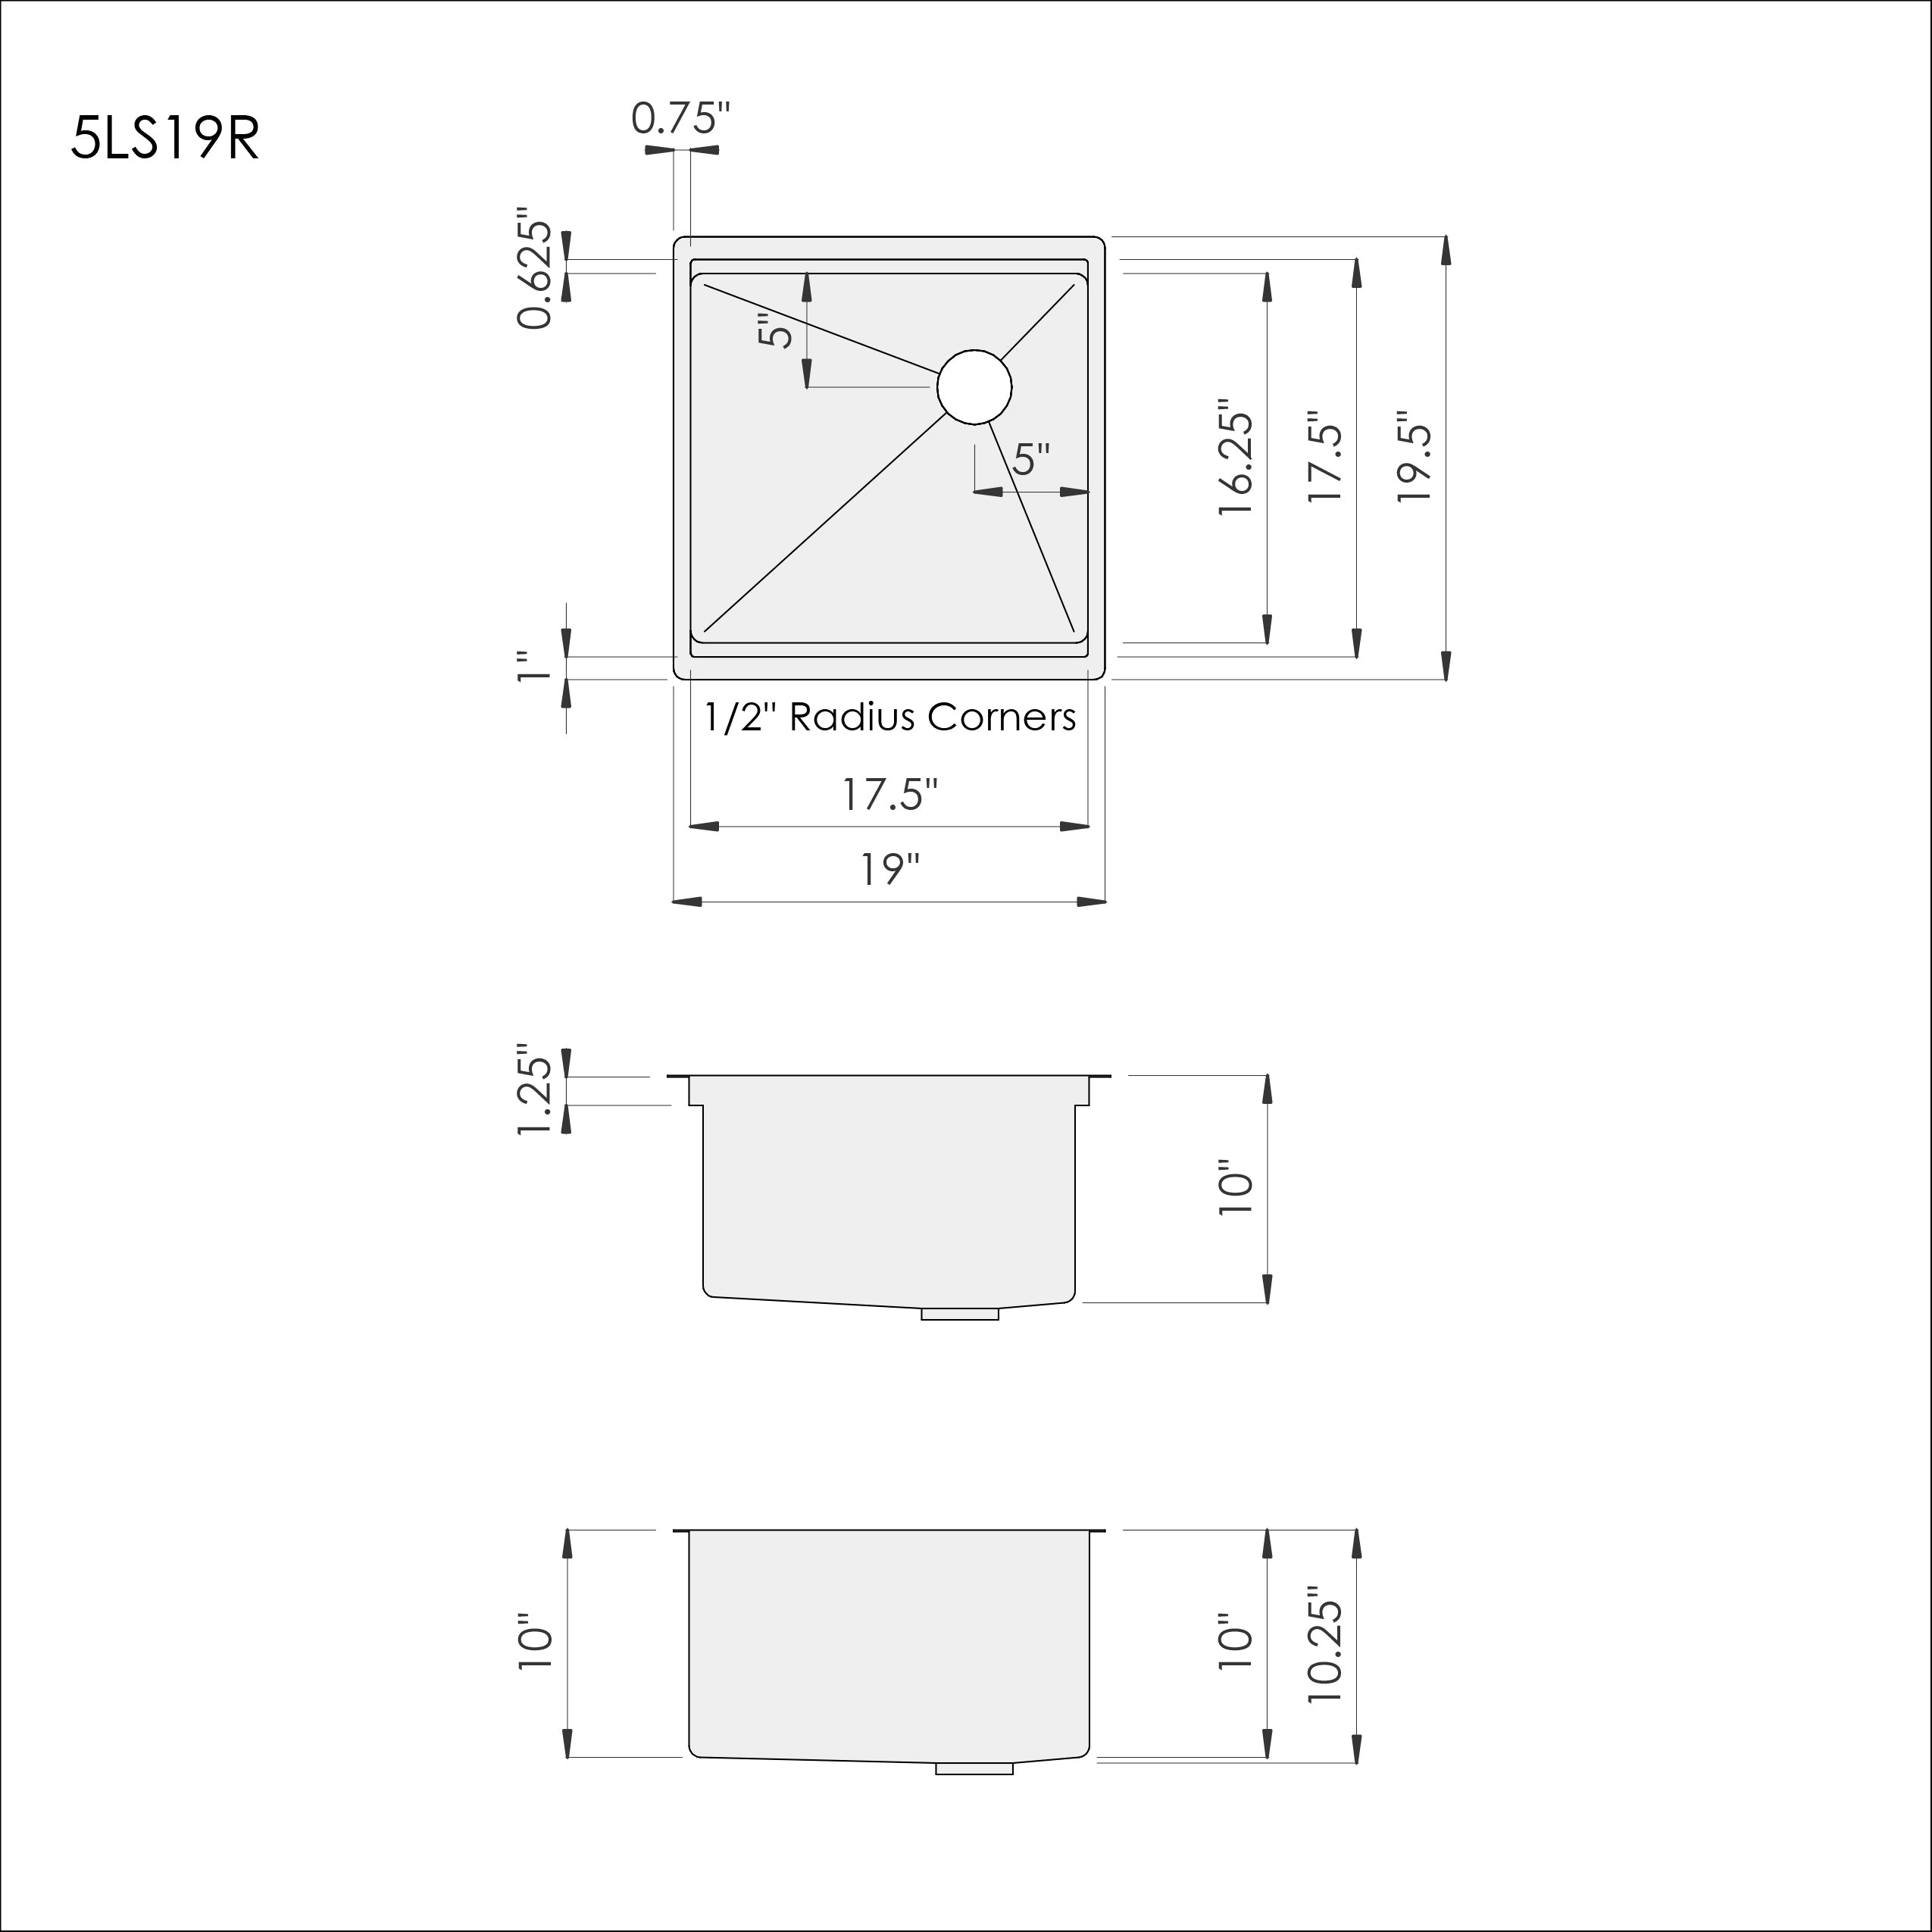 Dimensions for Create Good Sinks 19 inch stainless steel undermount workstation kitchen sink. Ten inches deep, right offset drain, seamless drain. Bar or prep sink.